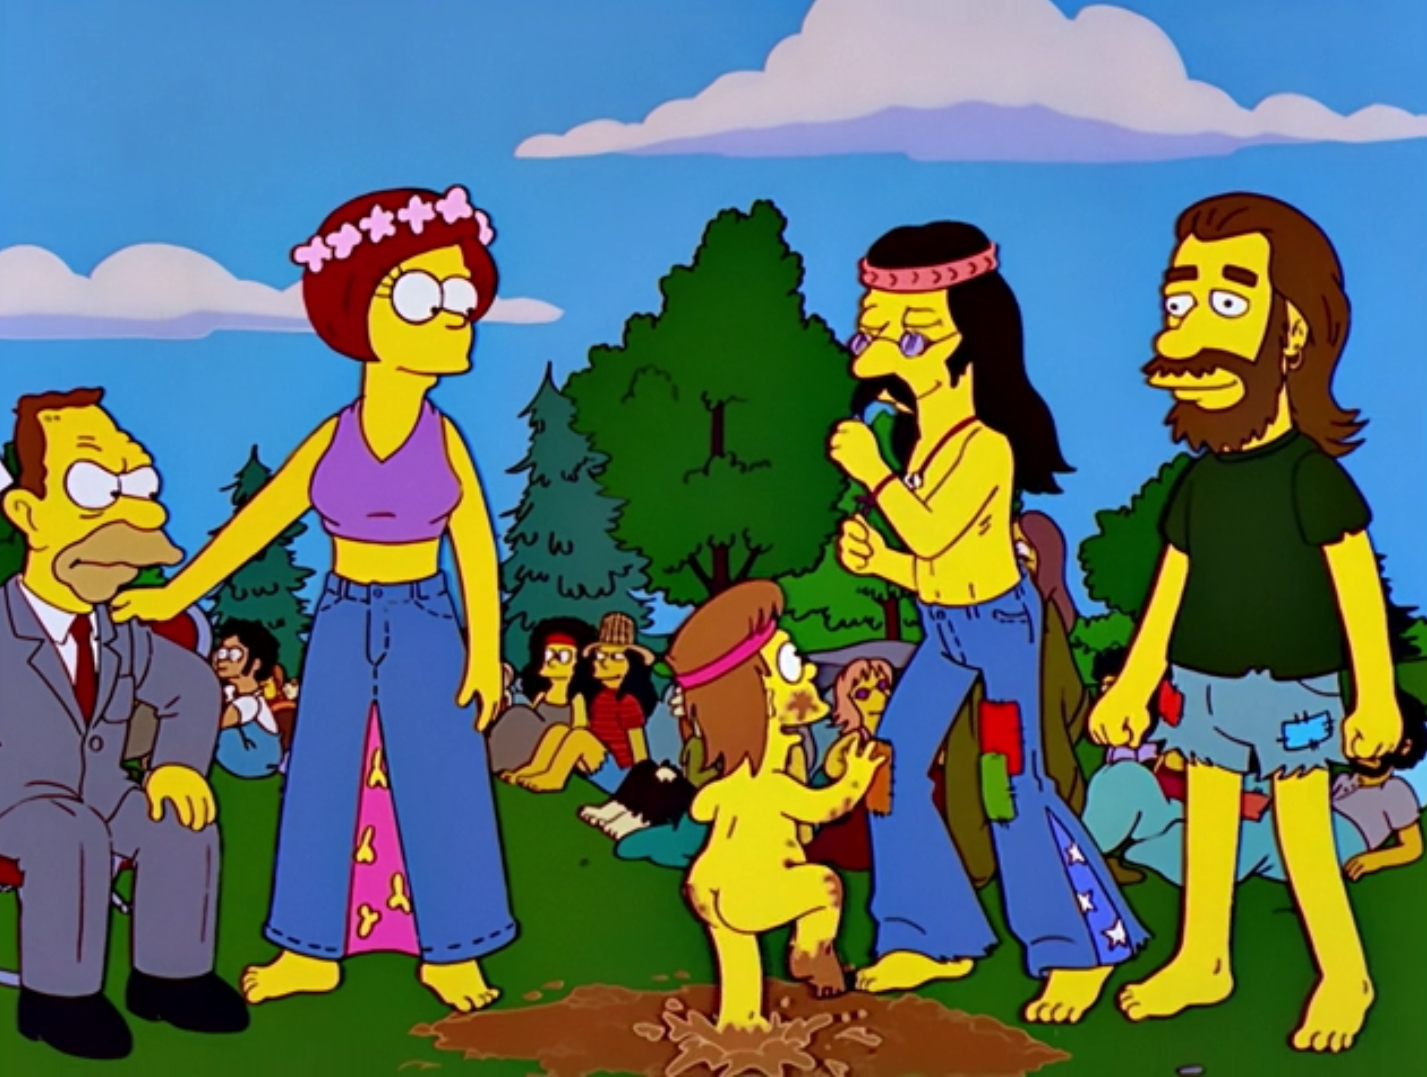 Woodstock Festival Wikisimpsons The Simpsons Wiki